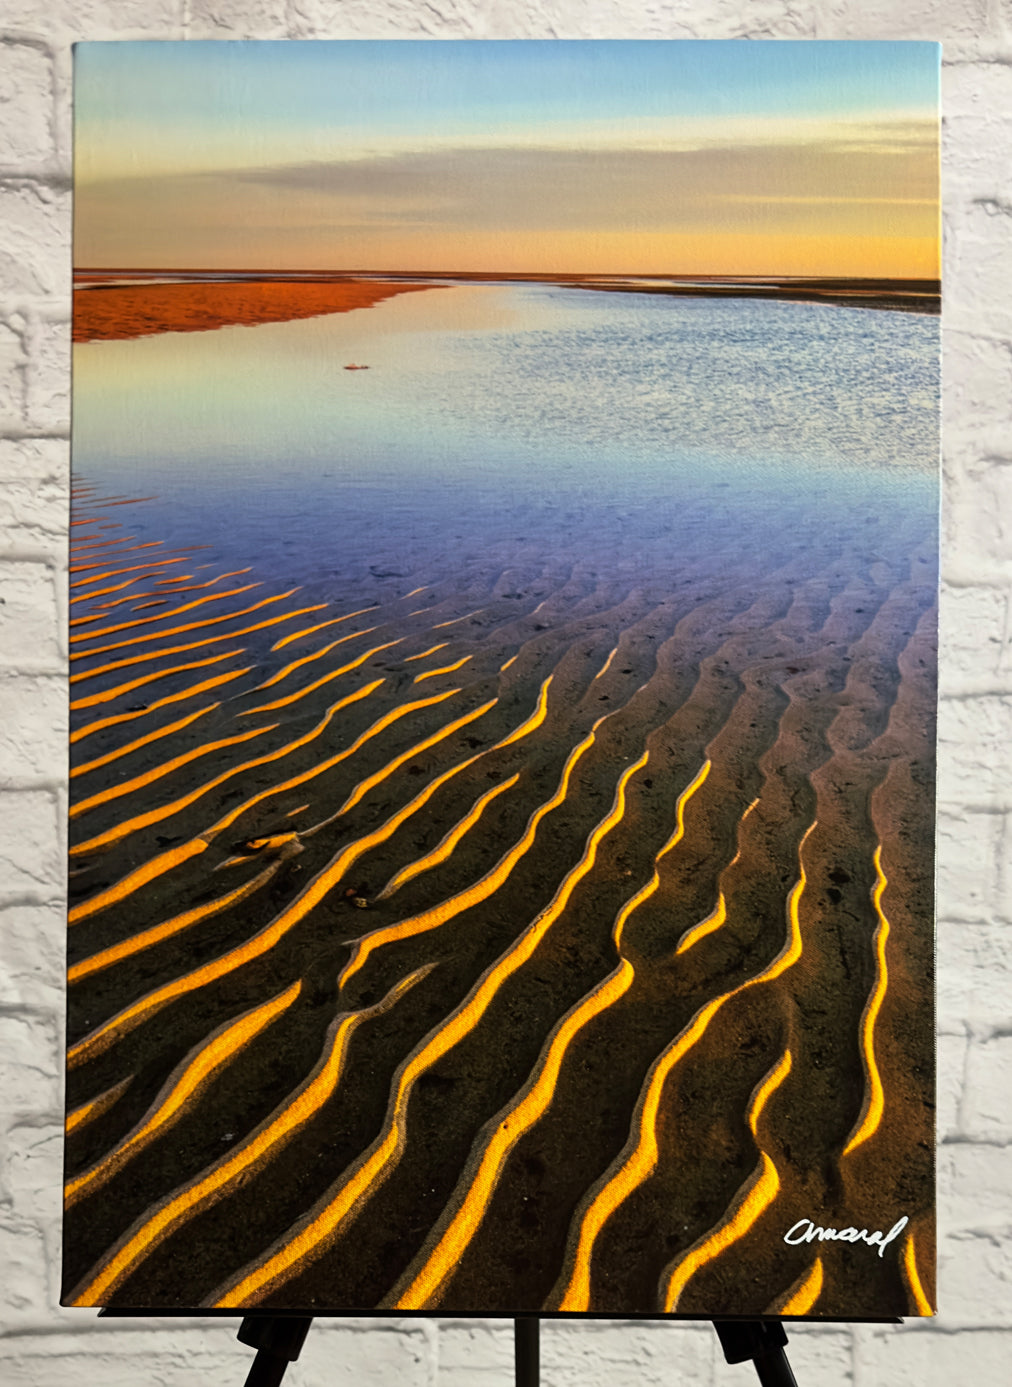 18x26 Gallery Wrapped Canvas - Chapin Beach in Dennis